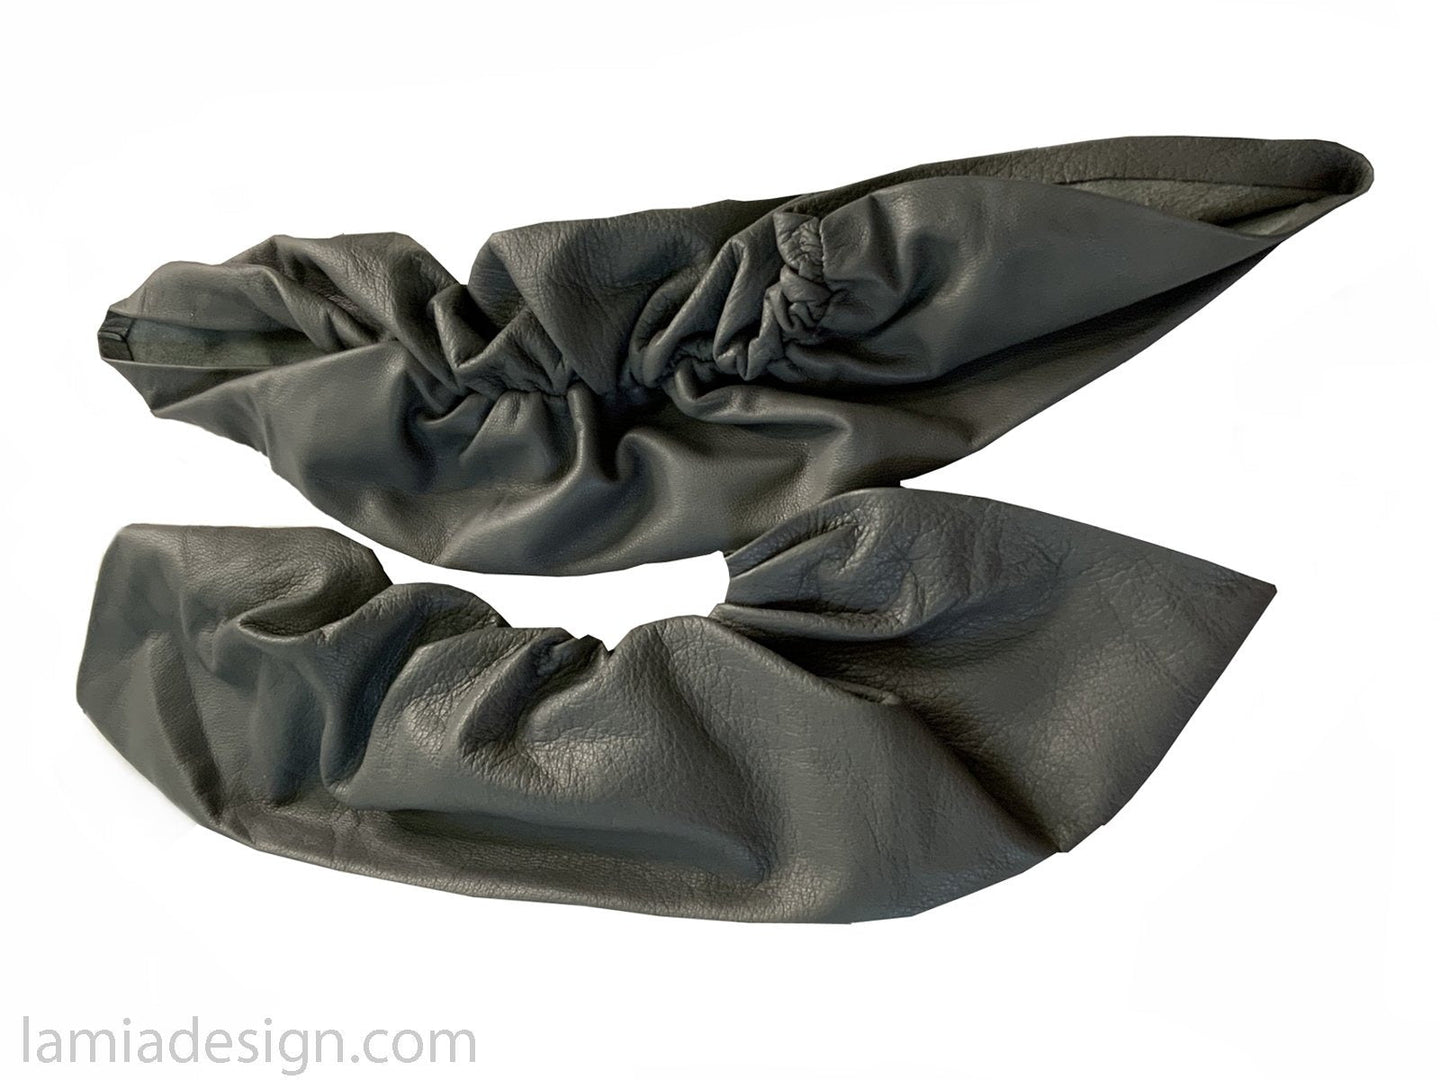 Olive green leather arm sleeves - Handmade Accessories